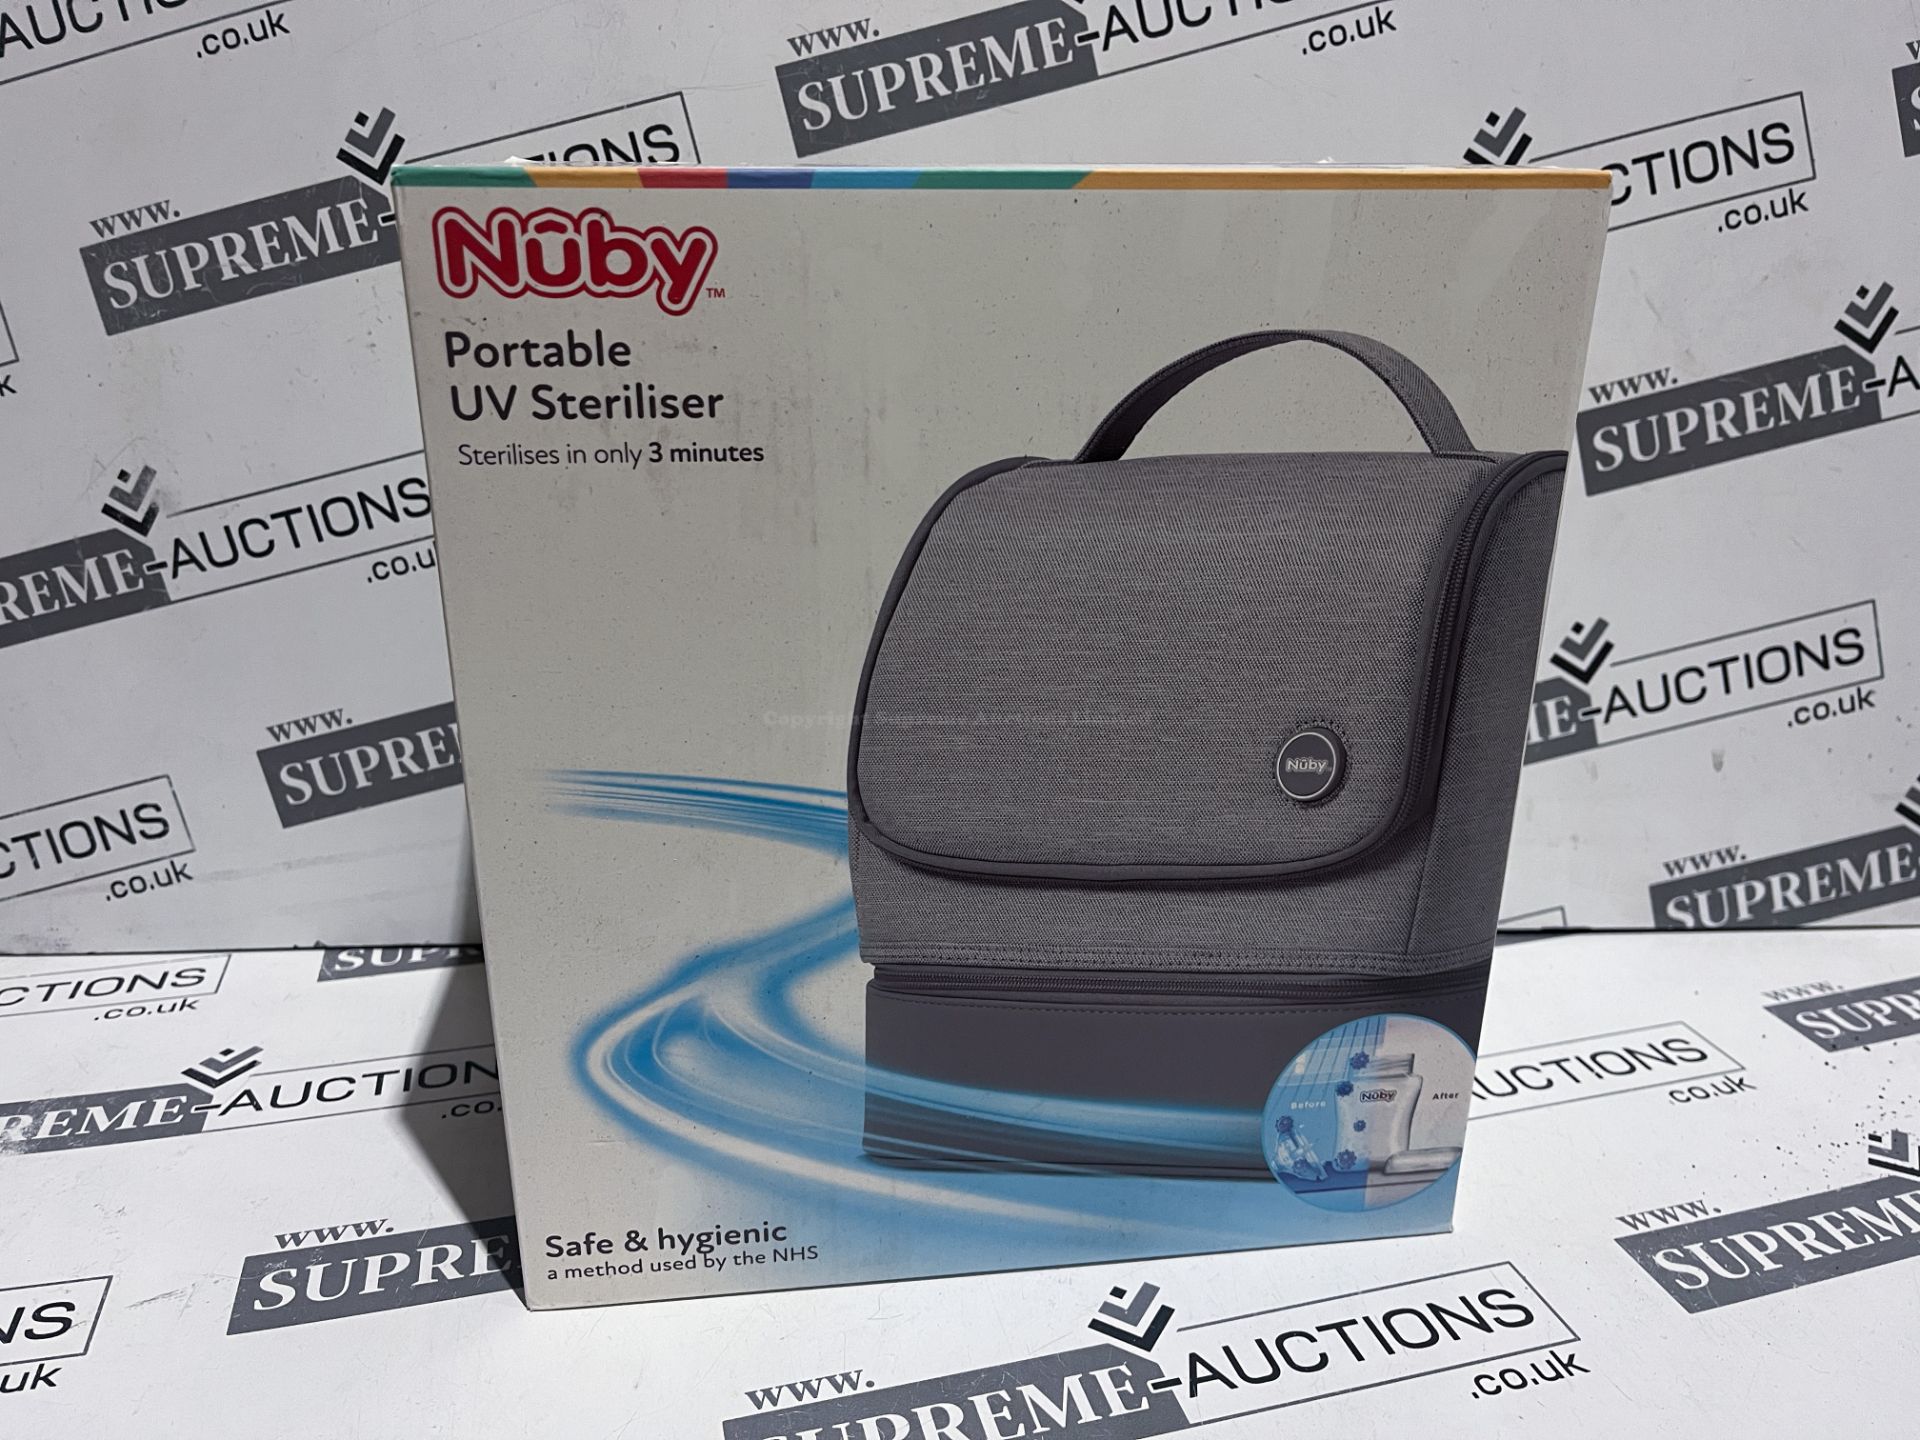 NUBY PORTABLE UV STERILISER, STERILISES IN ONLY 3 MINUTES, SAFE AND HYGIENIC METHOD USED BY THE